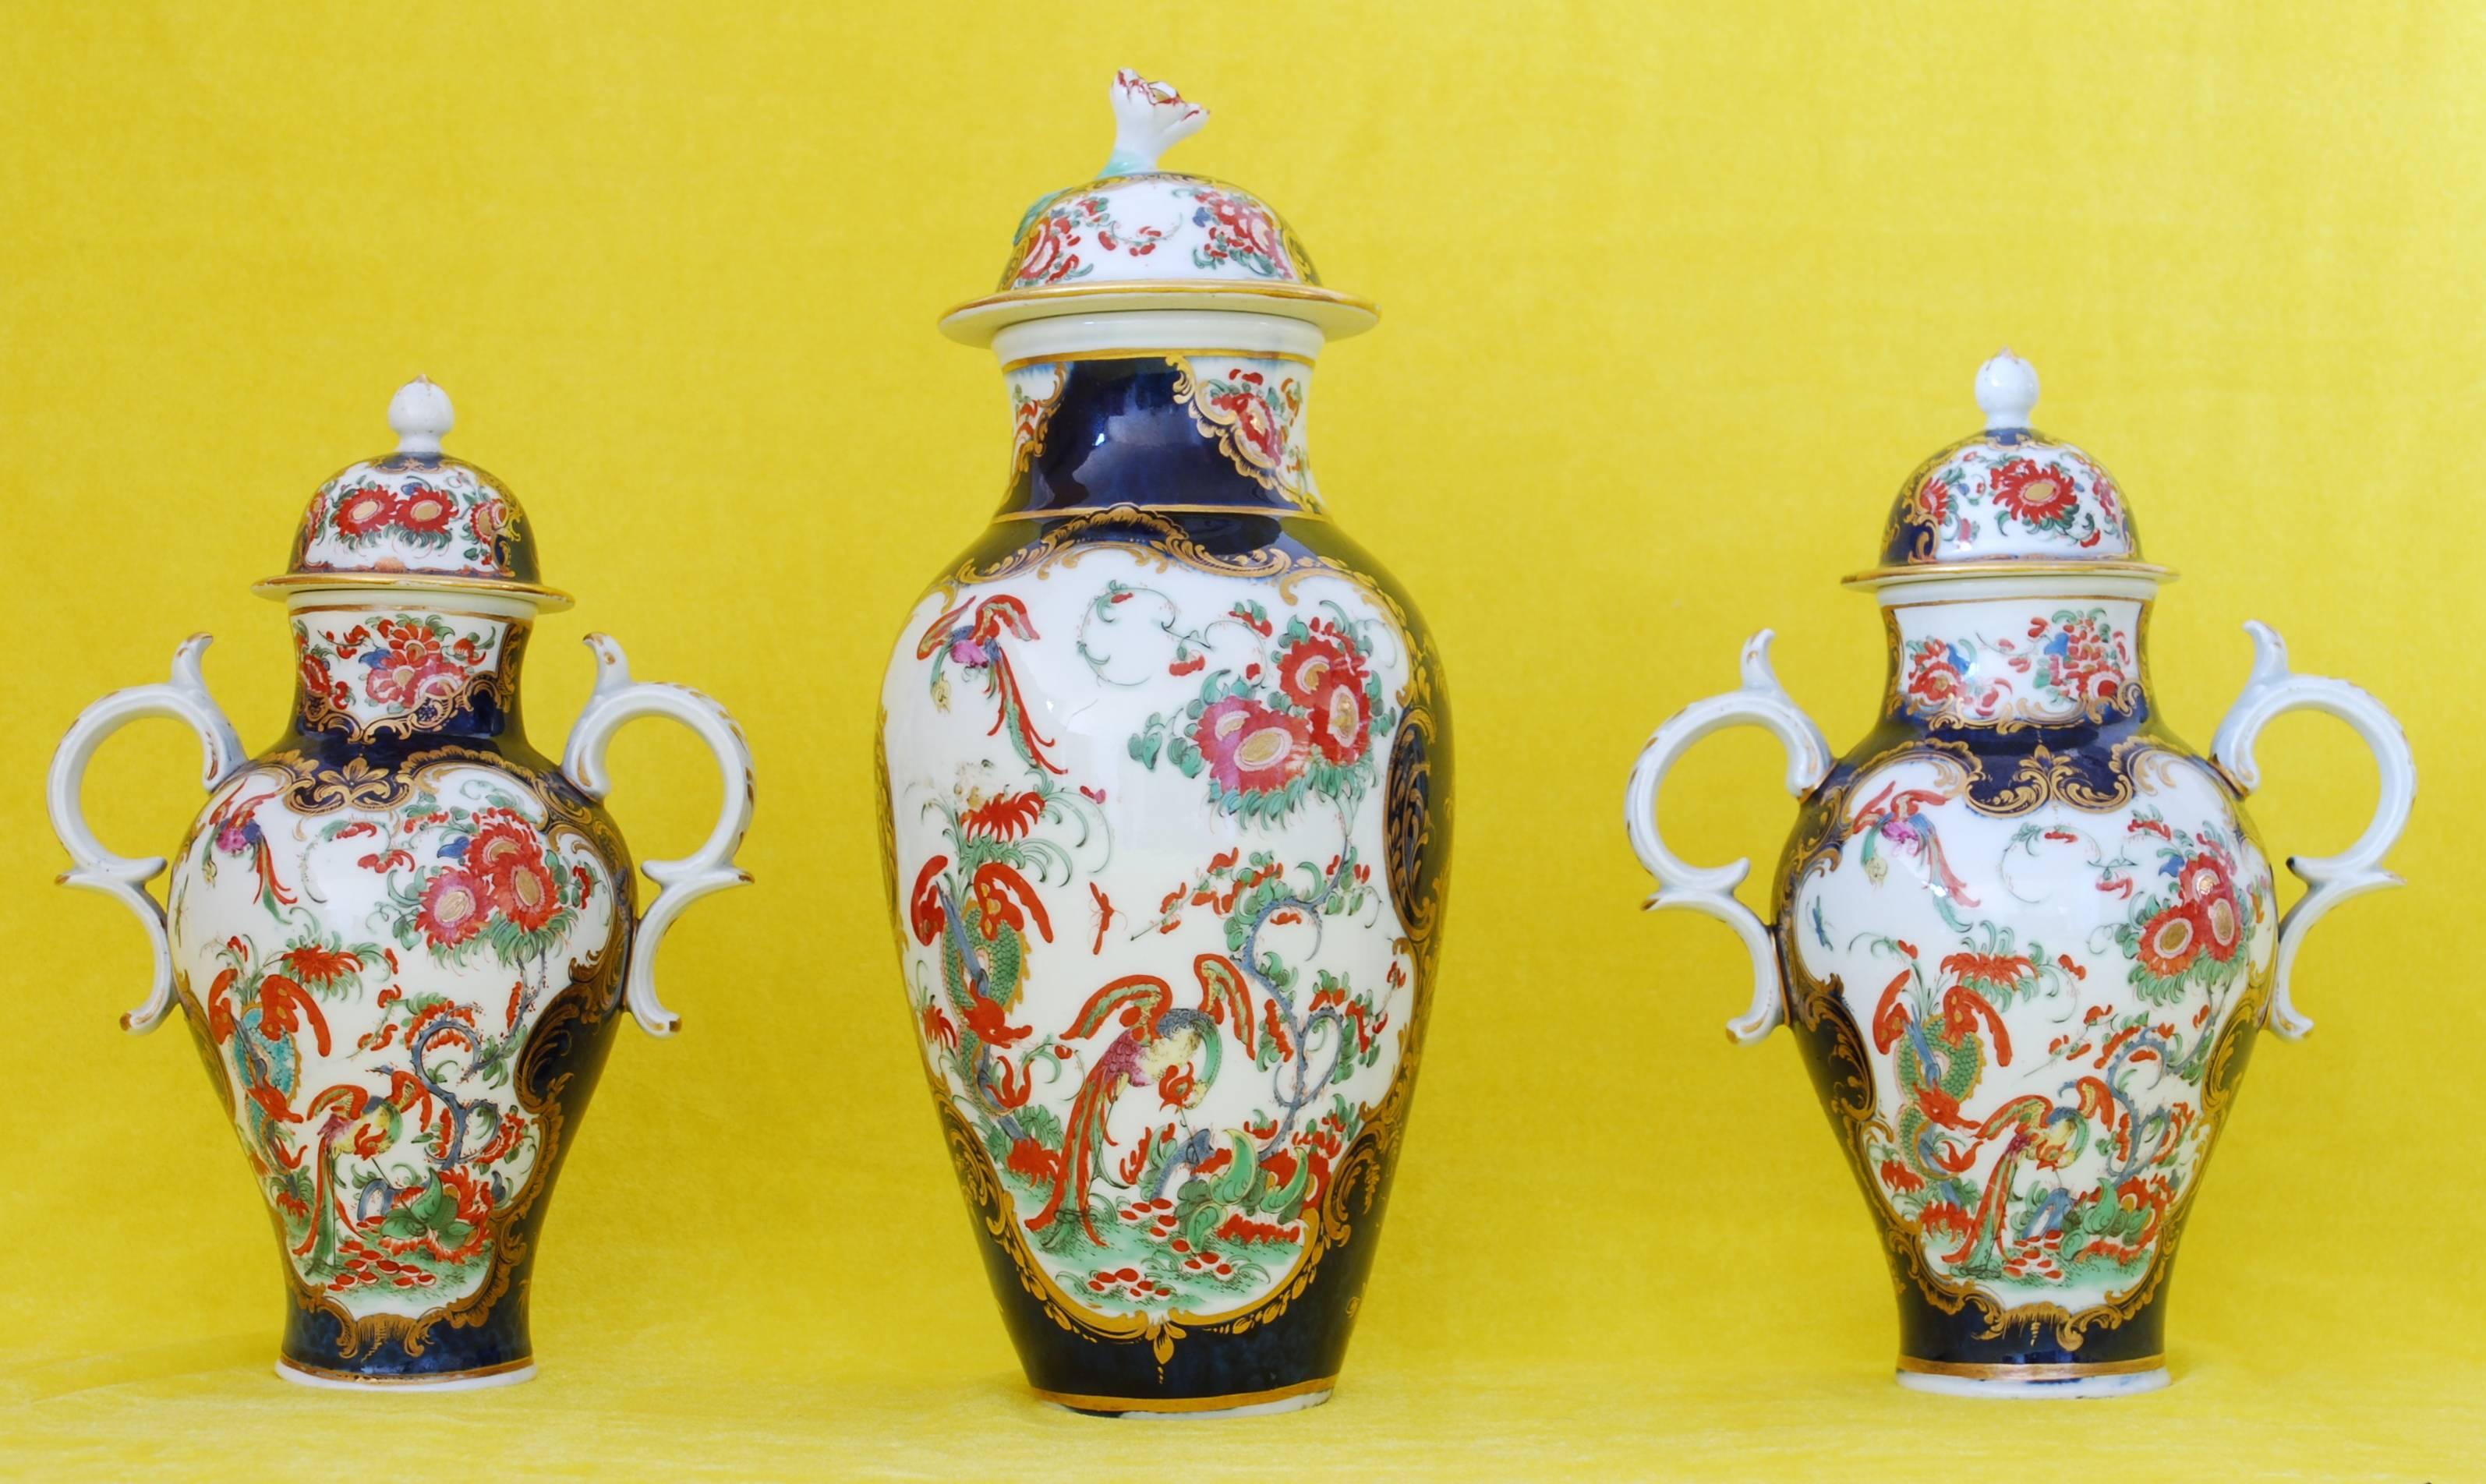 An assembled set of three vases in the scarce Jabberwocky pattern, on a scale blue background.